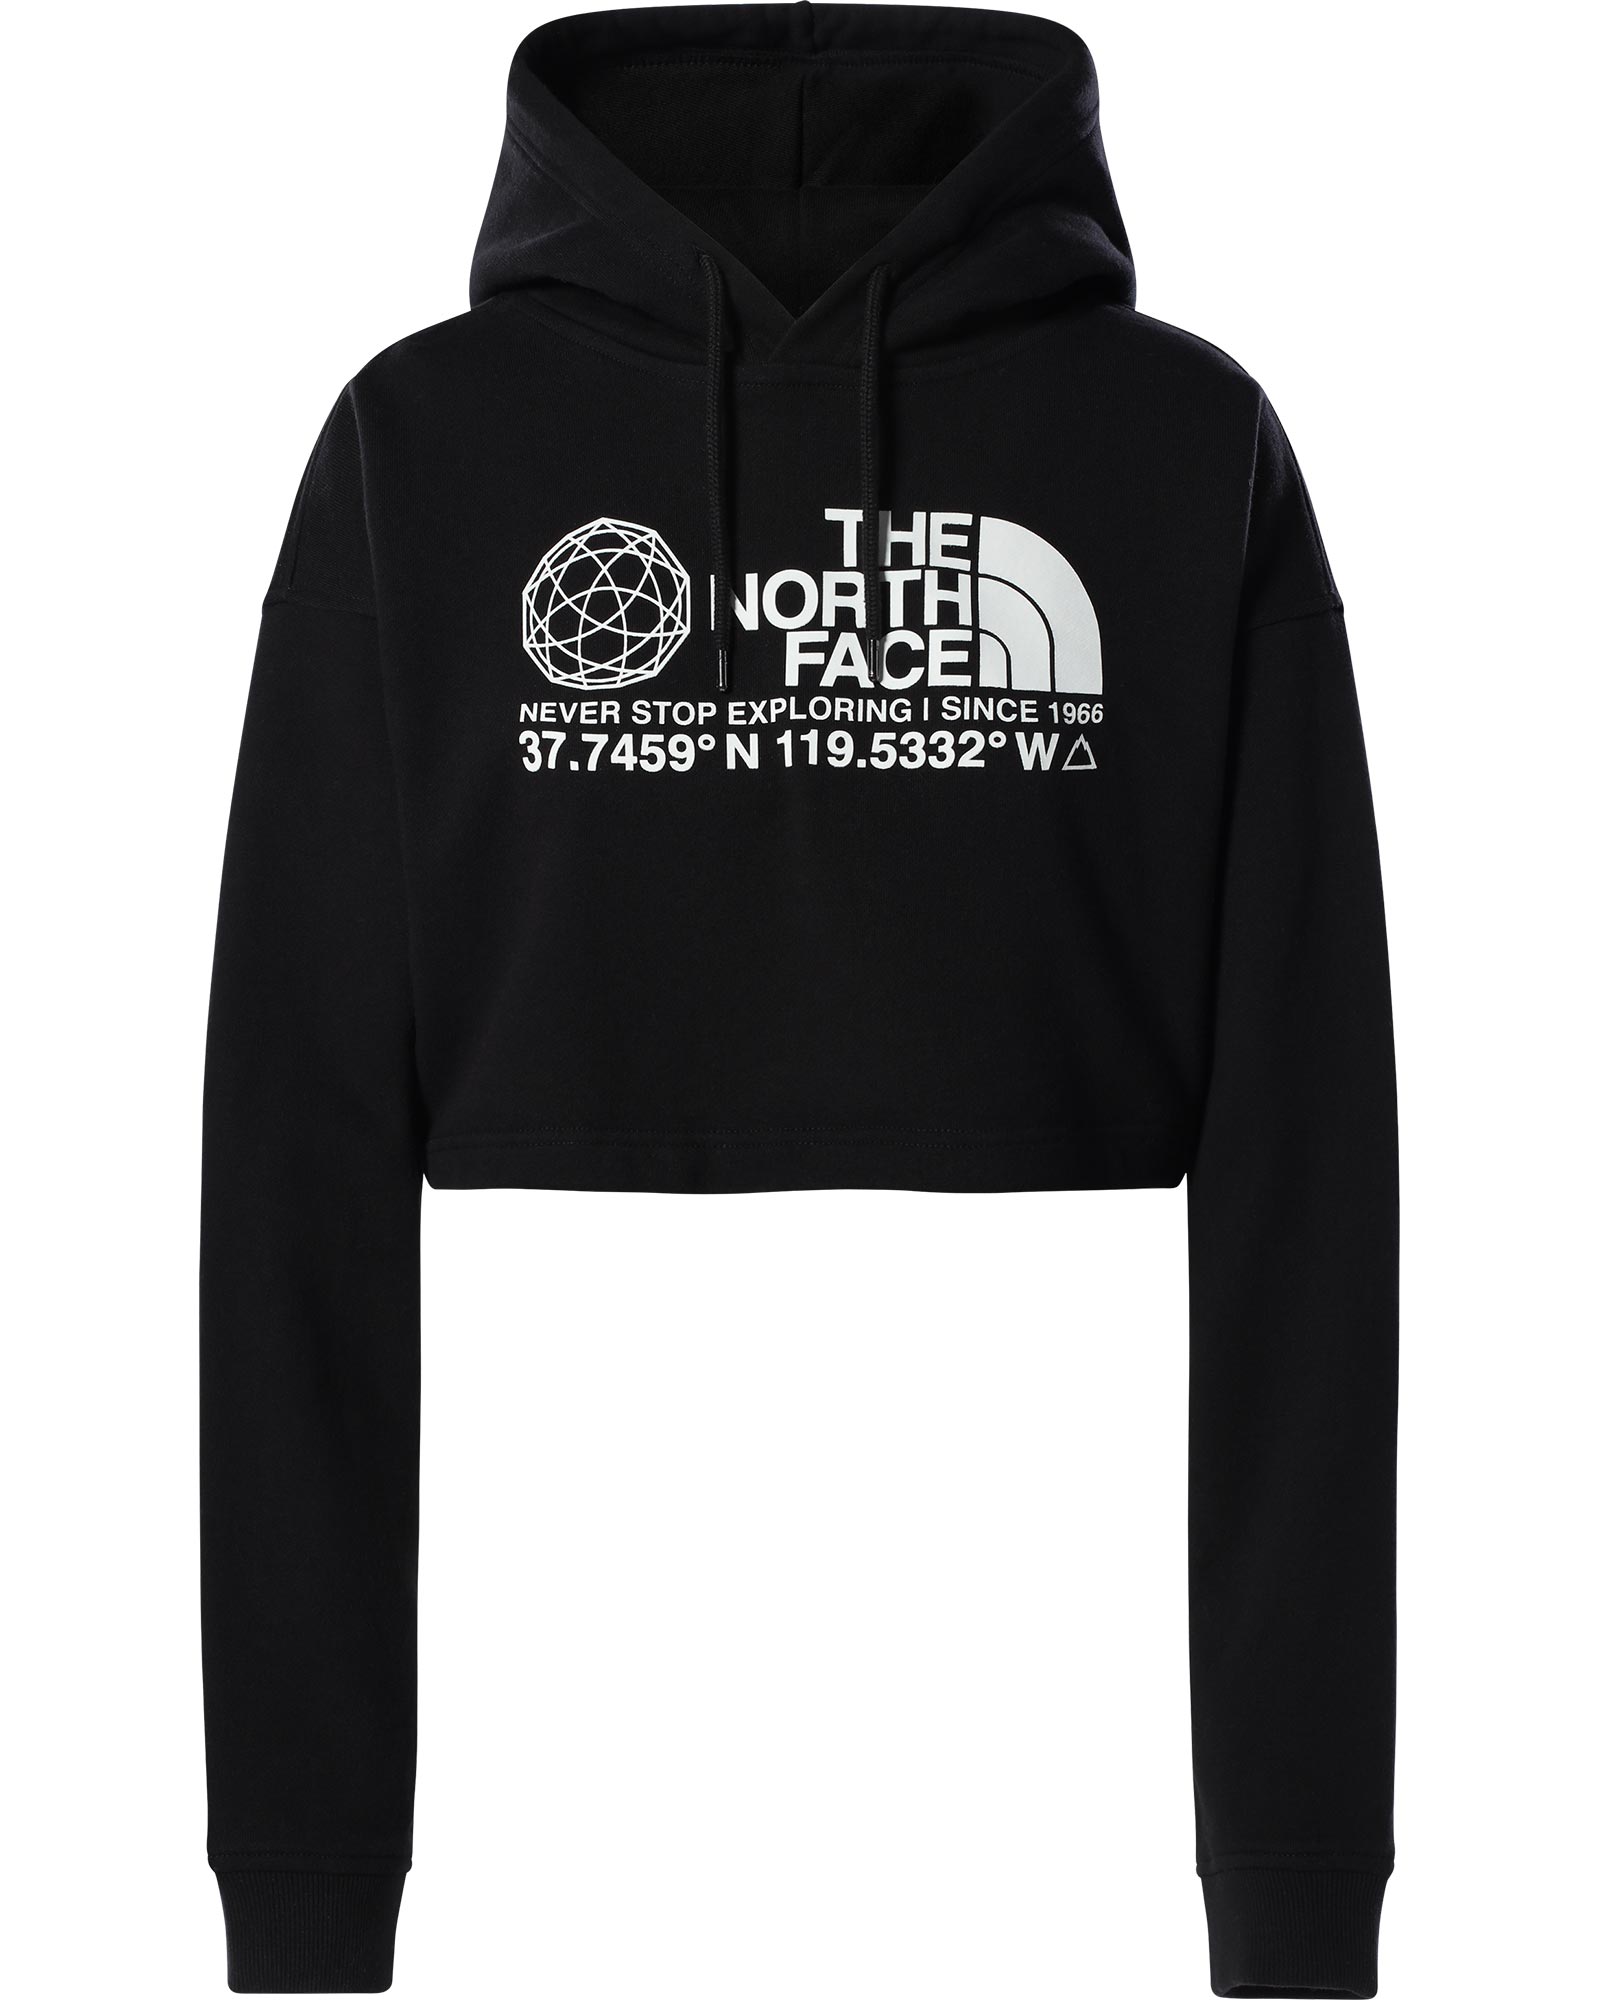 The North Face Coordinates Crop Drop Pullover Women’s Hoodie - TNF Black M